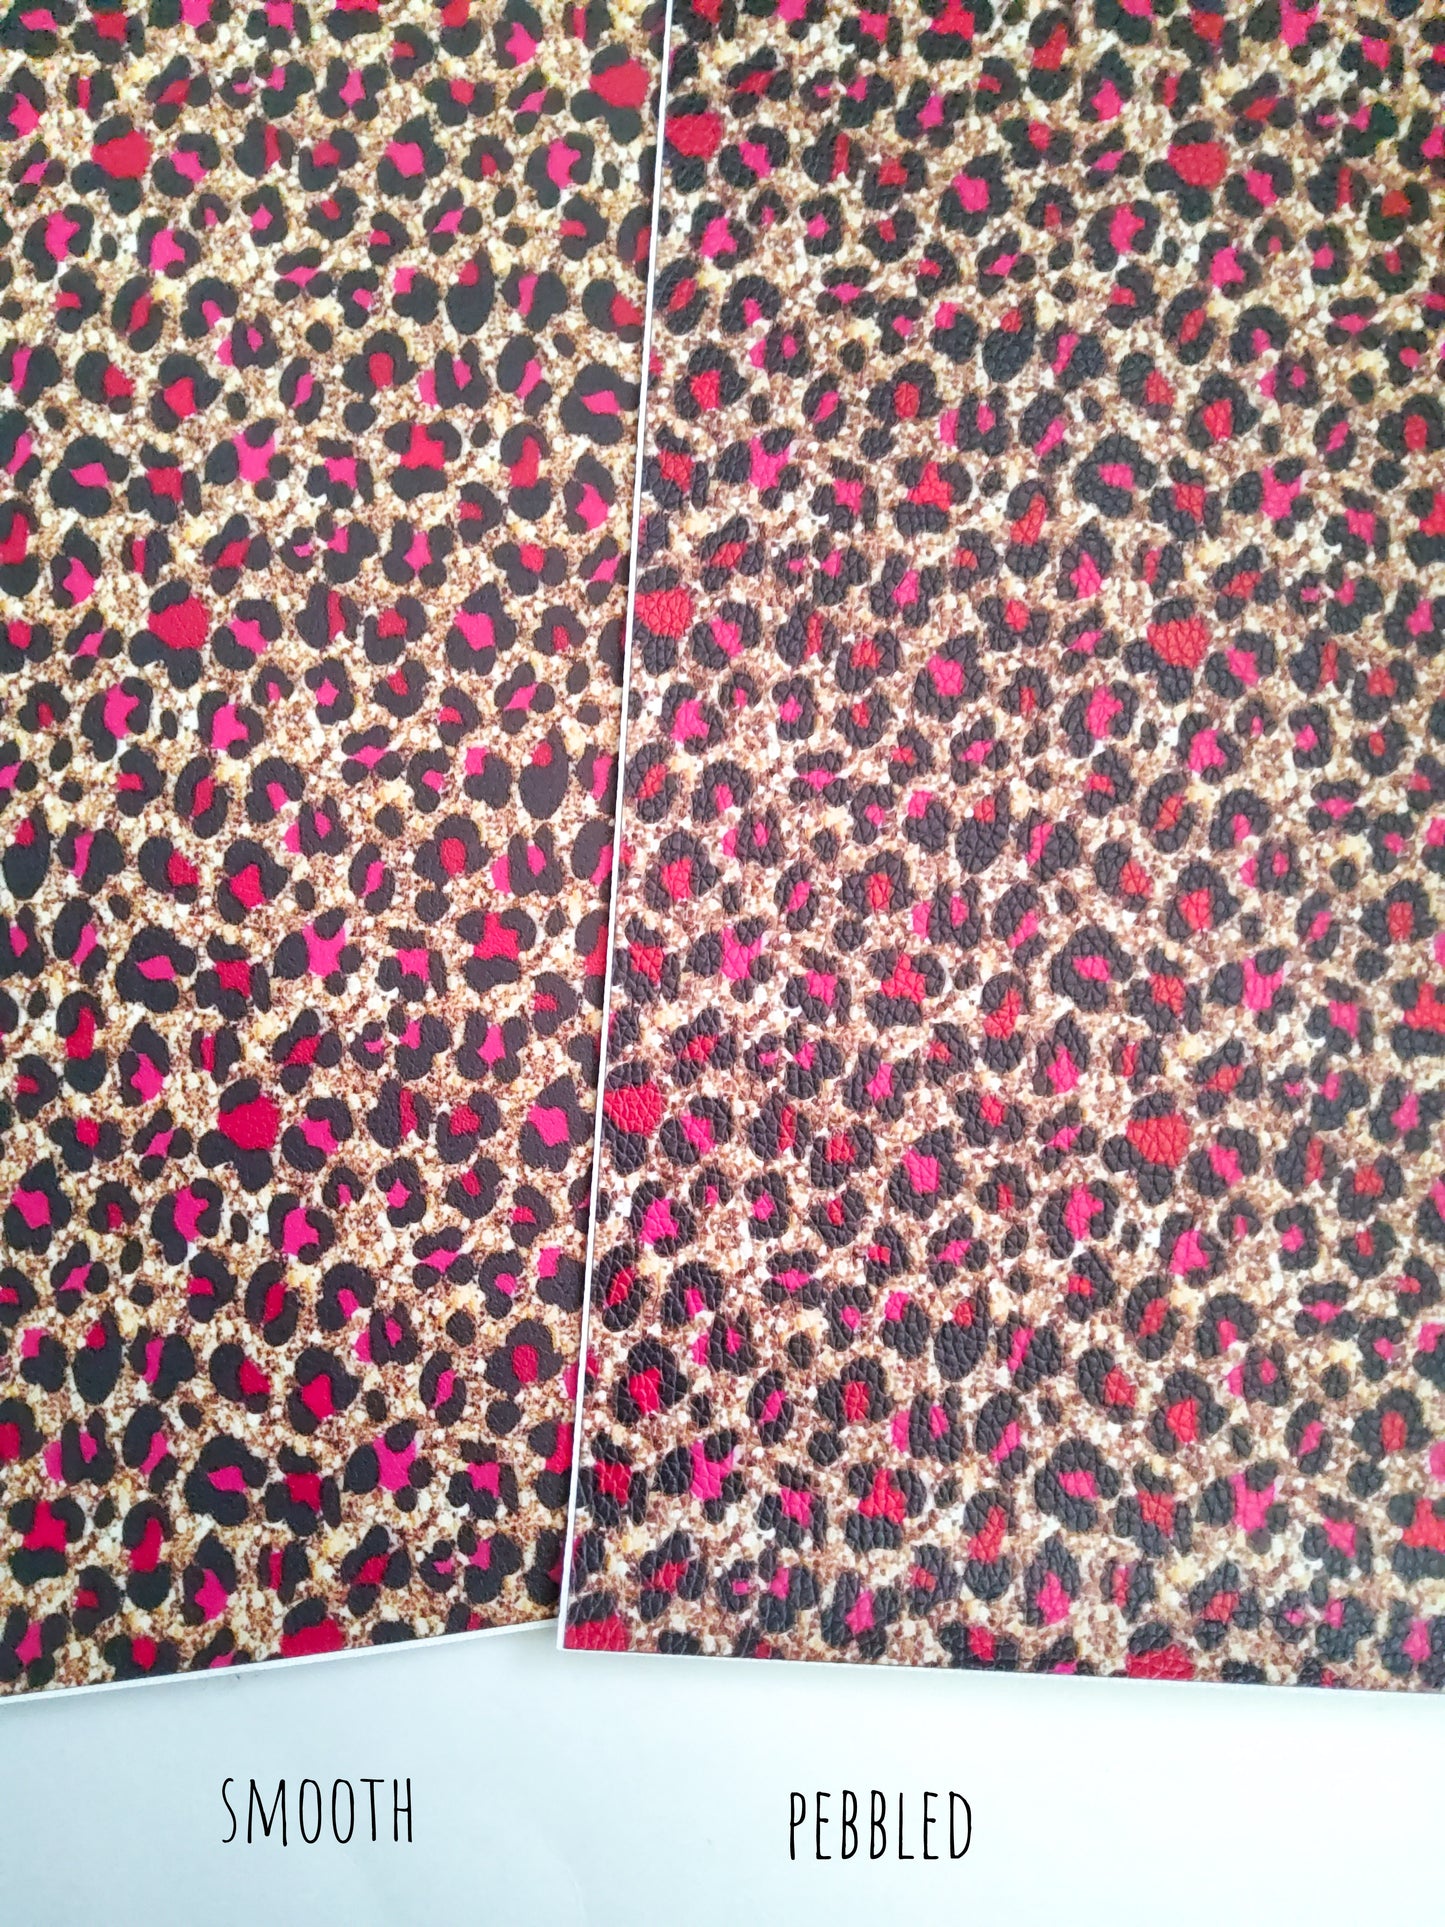 Brown and Pink/Red Animal Print 9x12 faux leather sheet